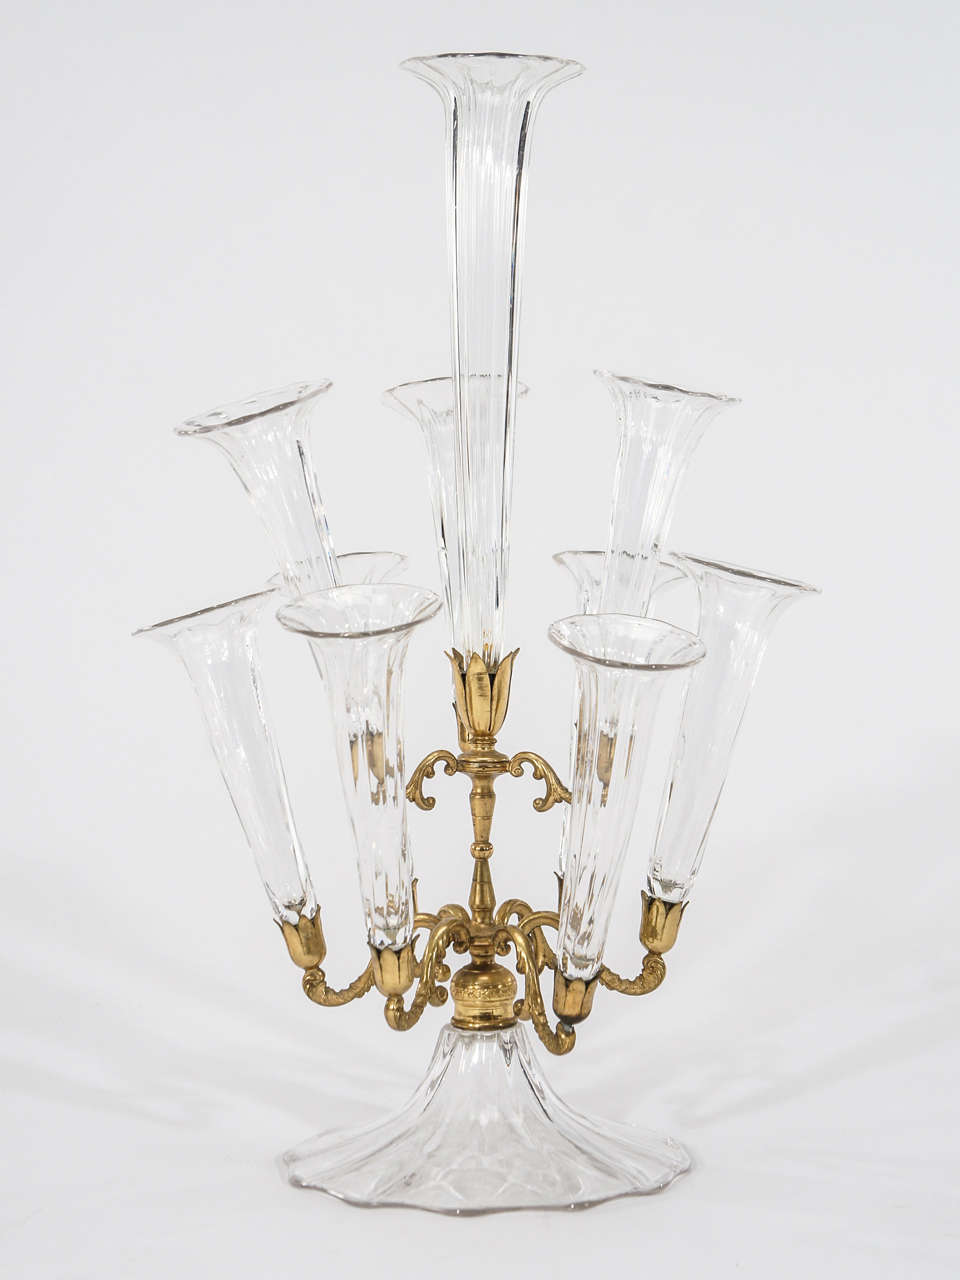 This unusual and elegant epergne is English attributed to Webb or Stevens & Williams and is a classic beauty. Not overly embellished, it features a single tall hand blown optic ribbed trumpet vase surrounded by 8 matching hand blown smaller ones.